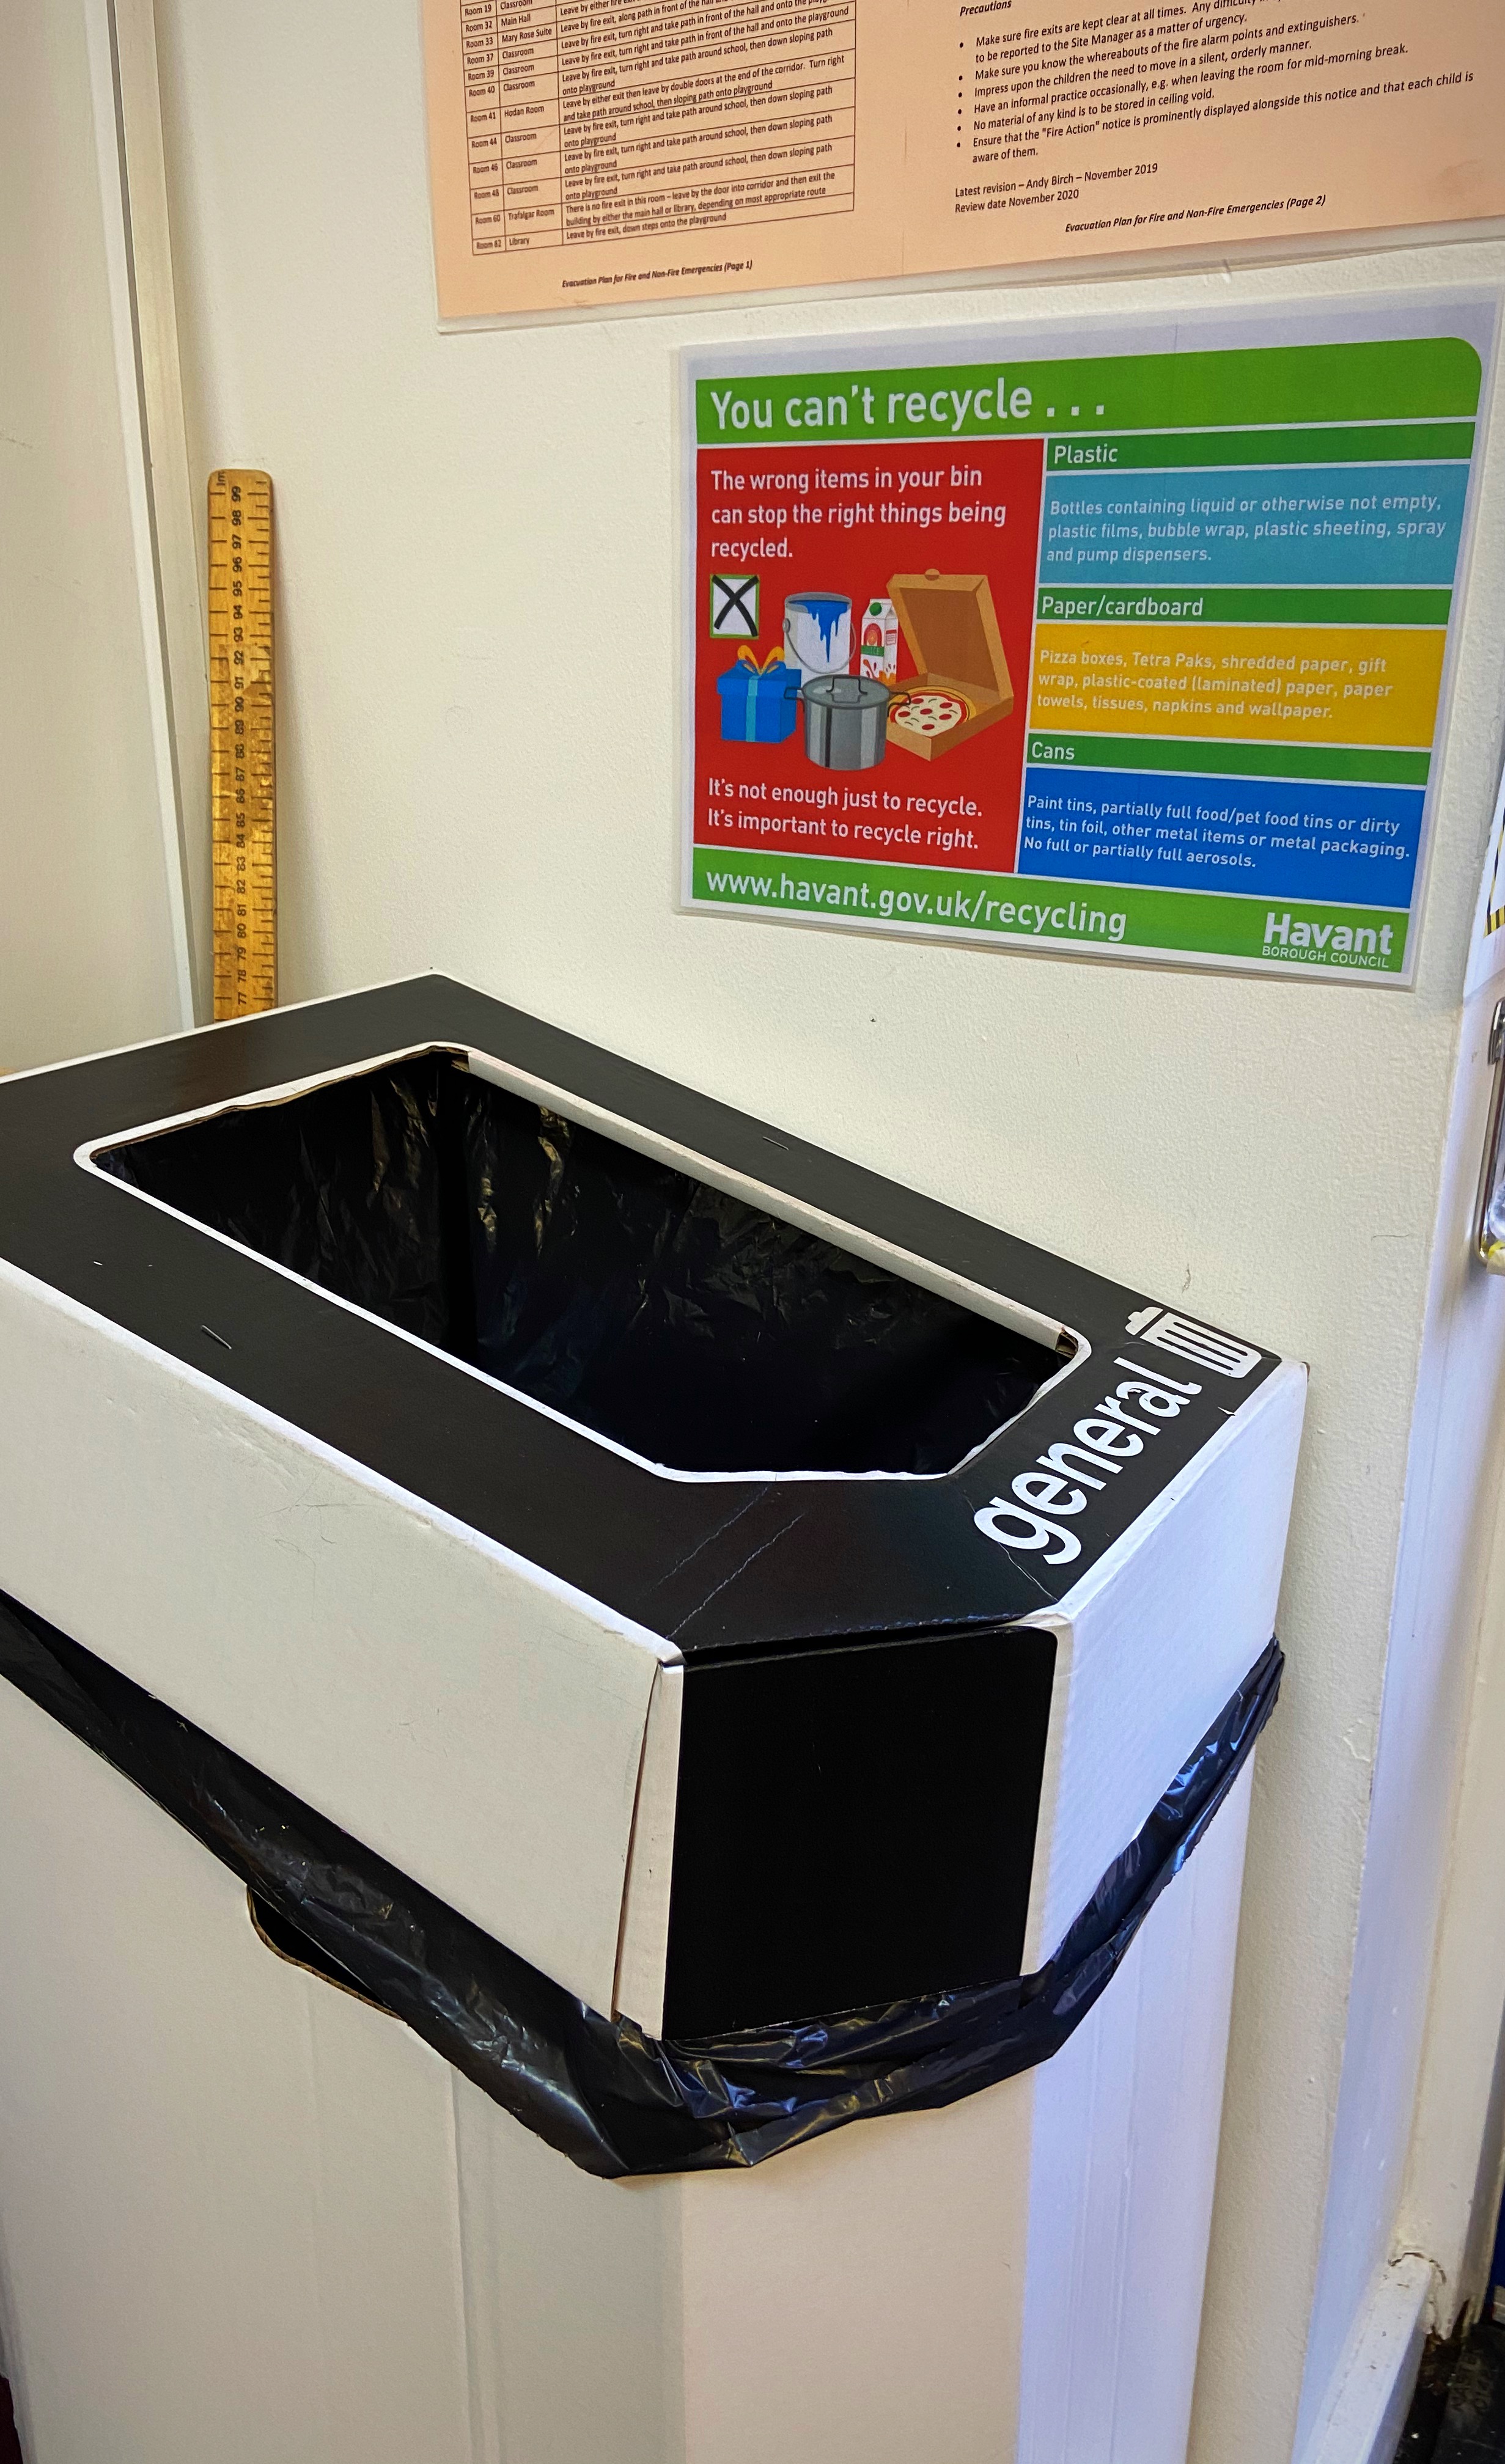 New General Waste and Mixed Recycling bins have been introduced to all classes, shared areas, learning spaces and community areas. We are now more mindful of how we throw away our waste and what can/cannot be recycled.